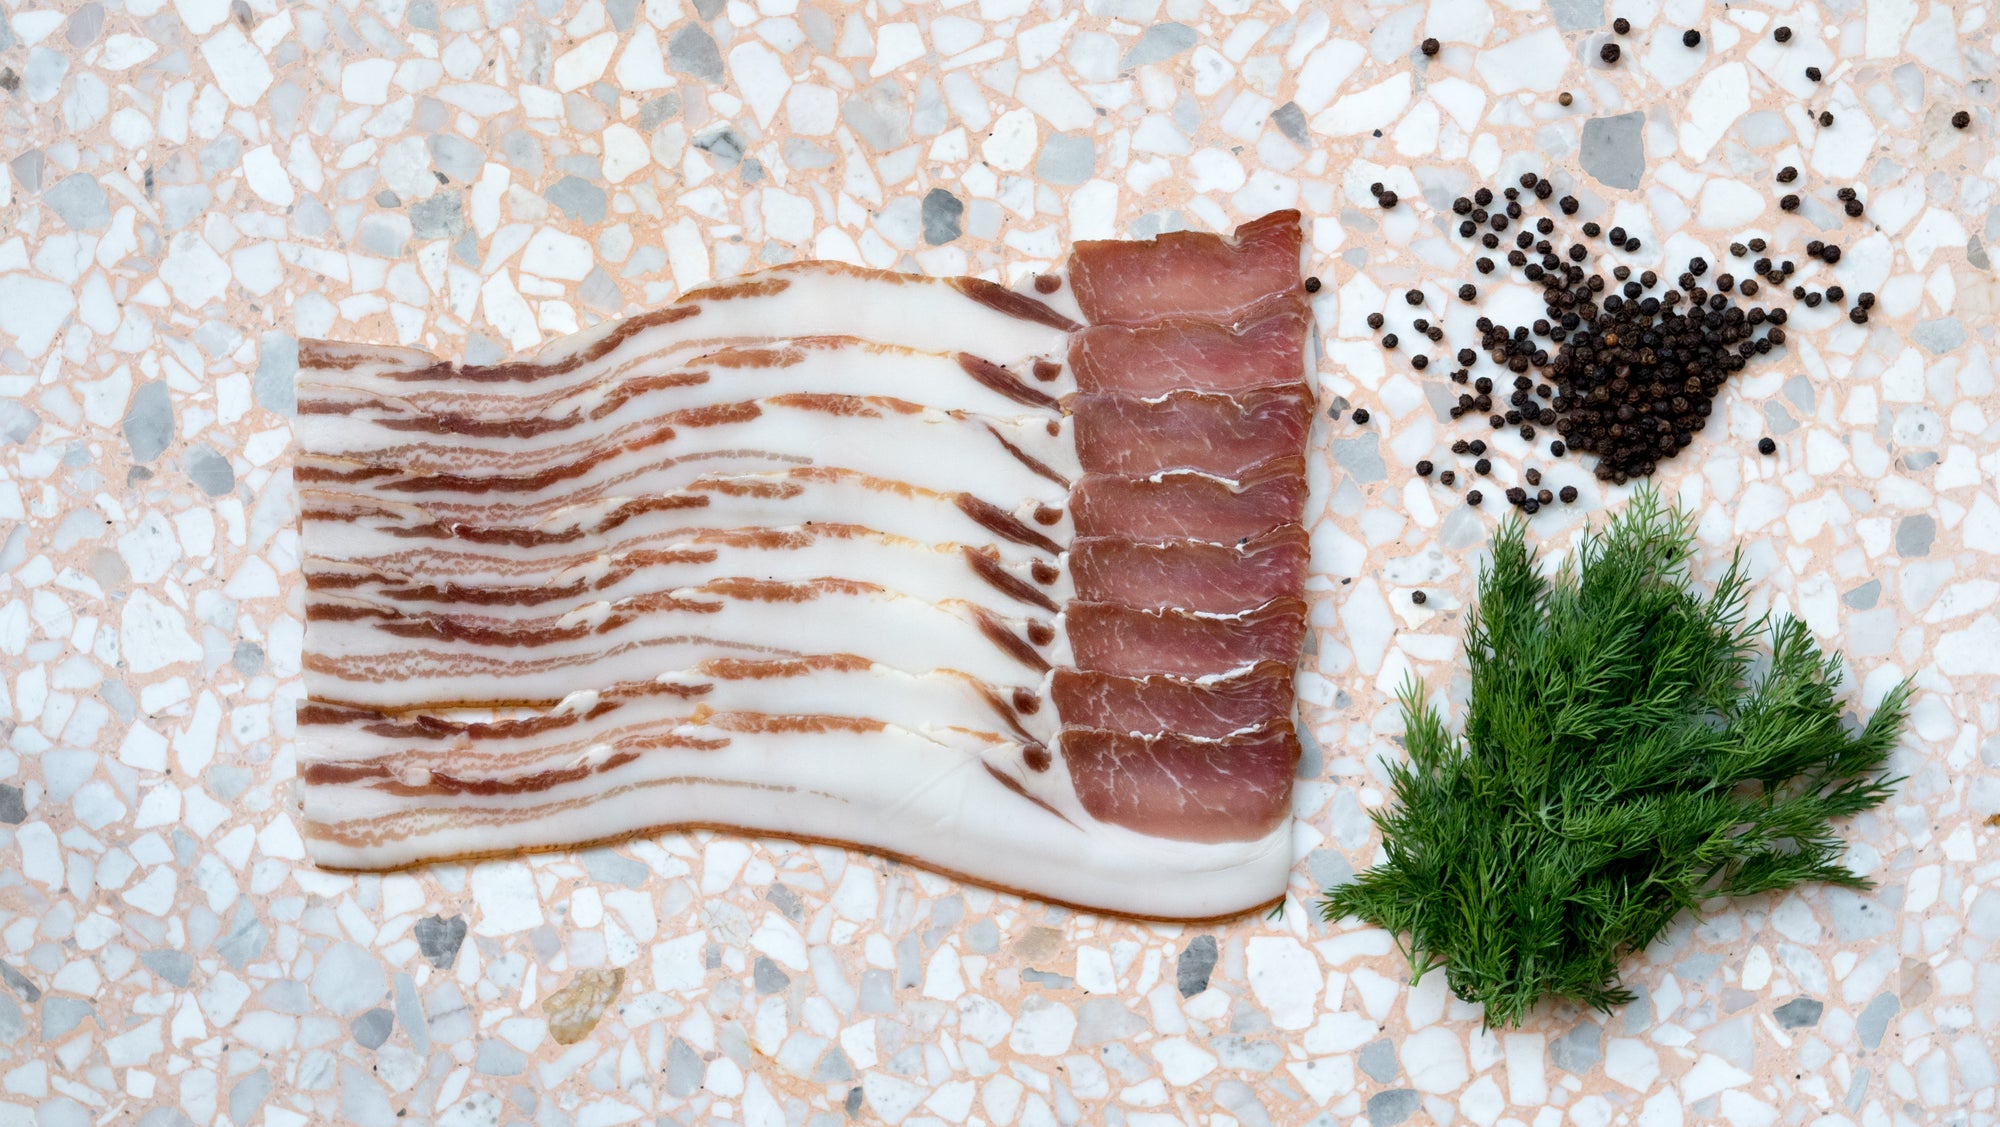 What is dry cured bacon?